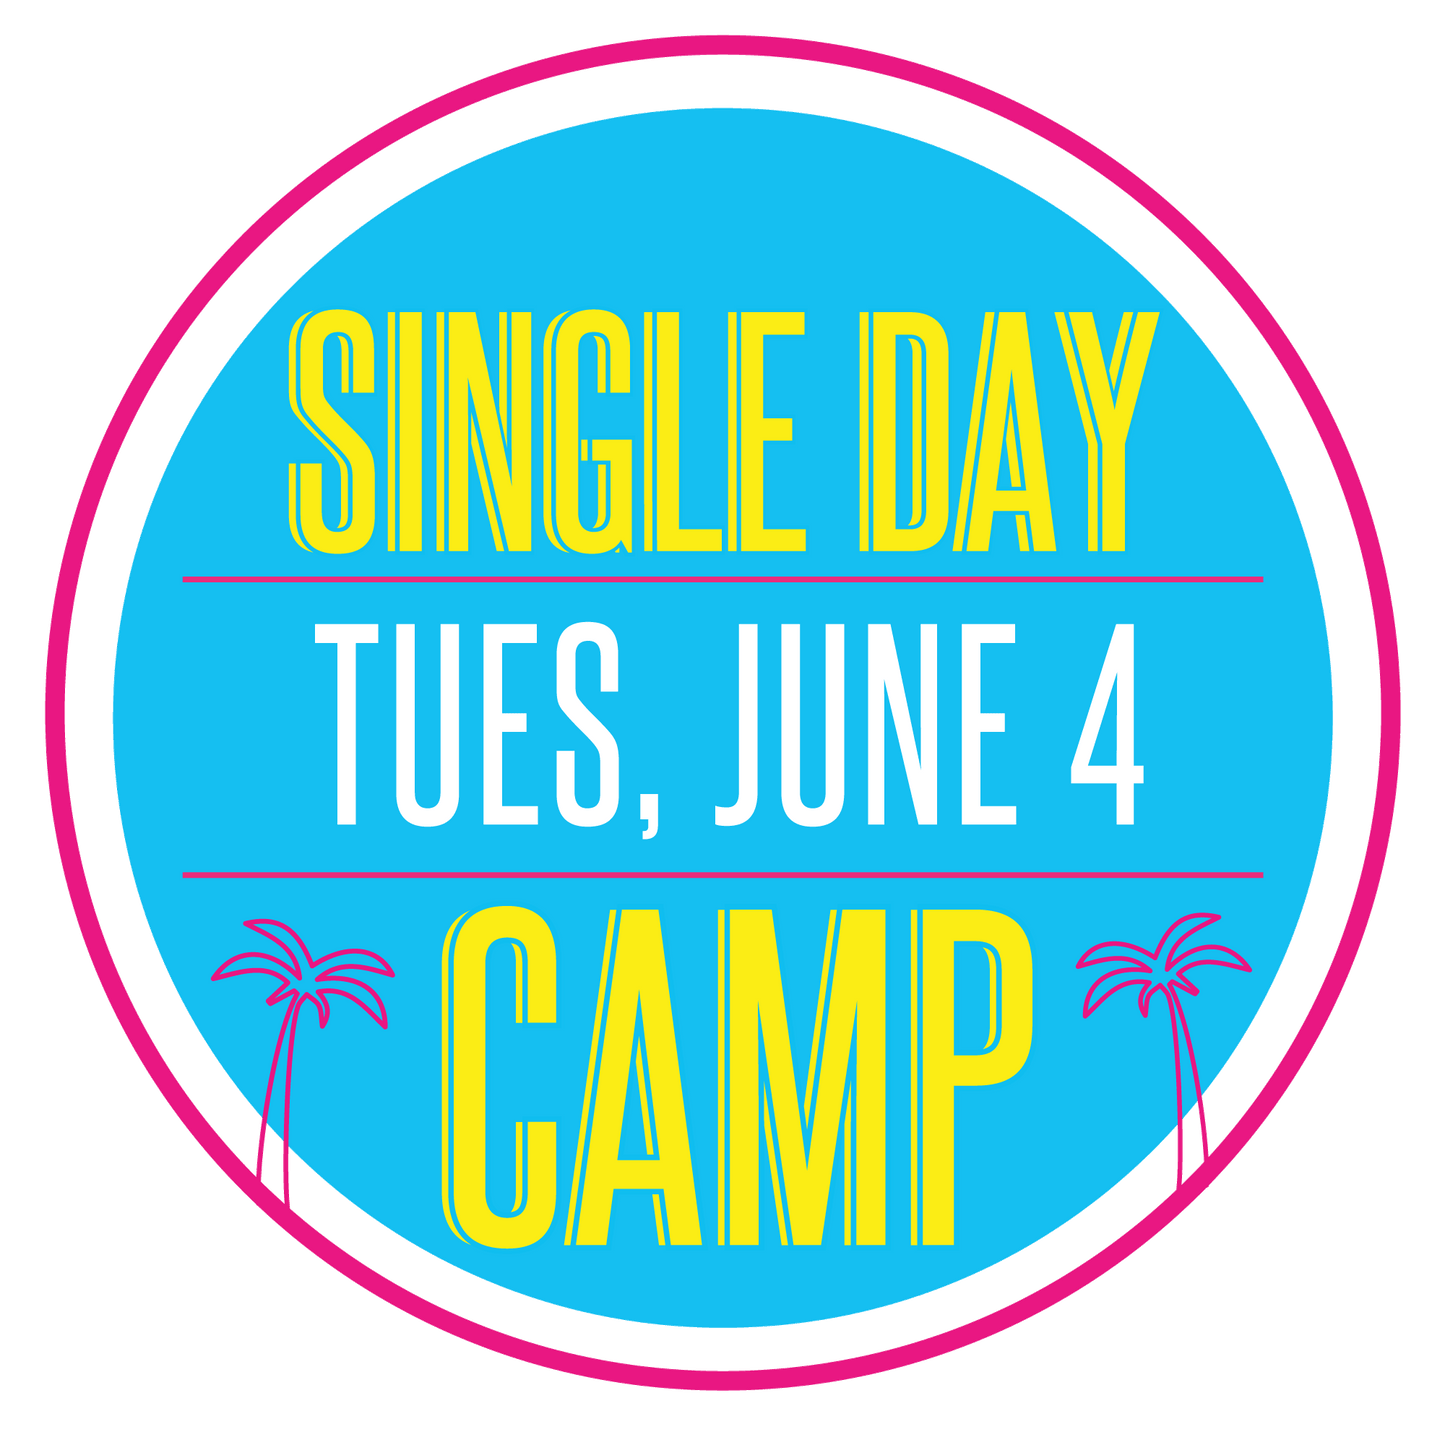 Single Day Sewing Workshop: Tuesday, June 4, 9am-3pm